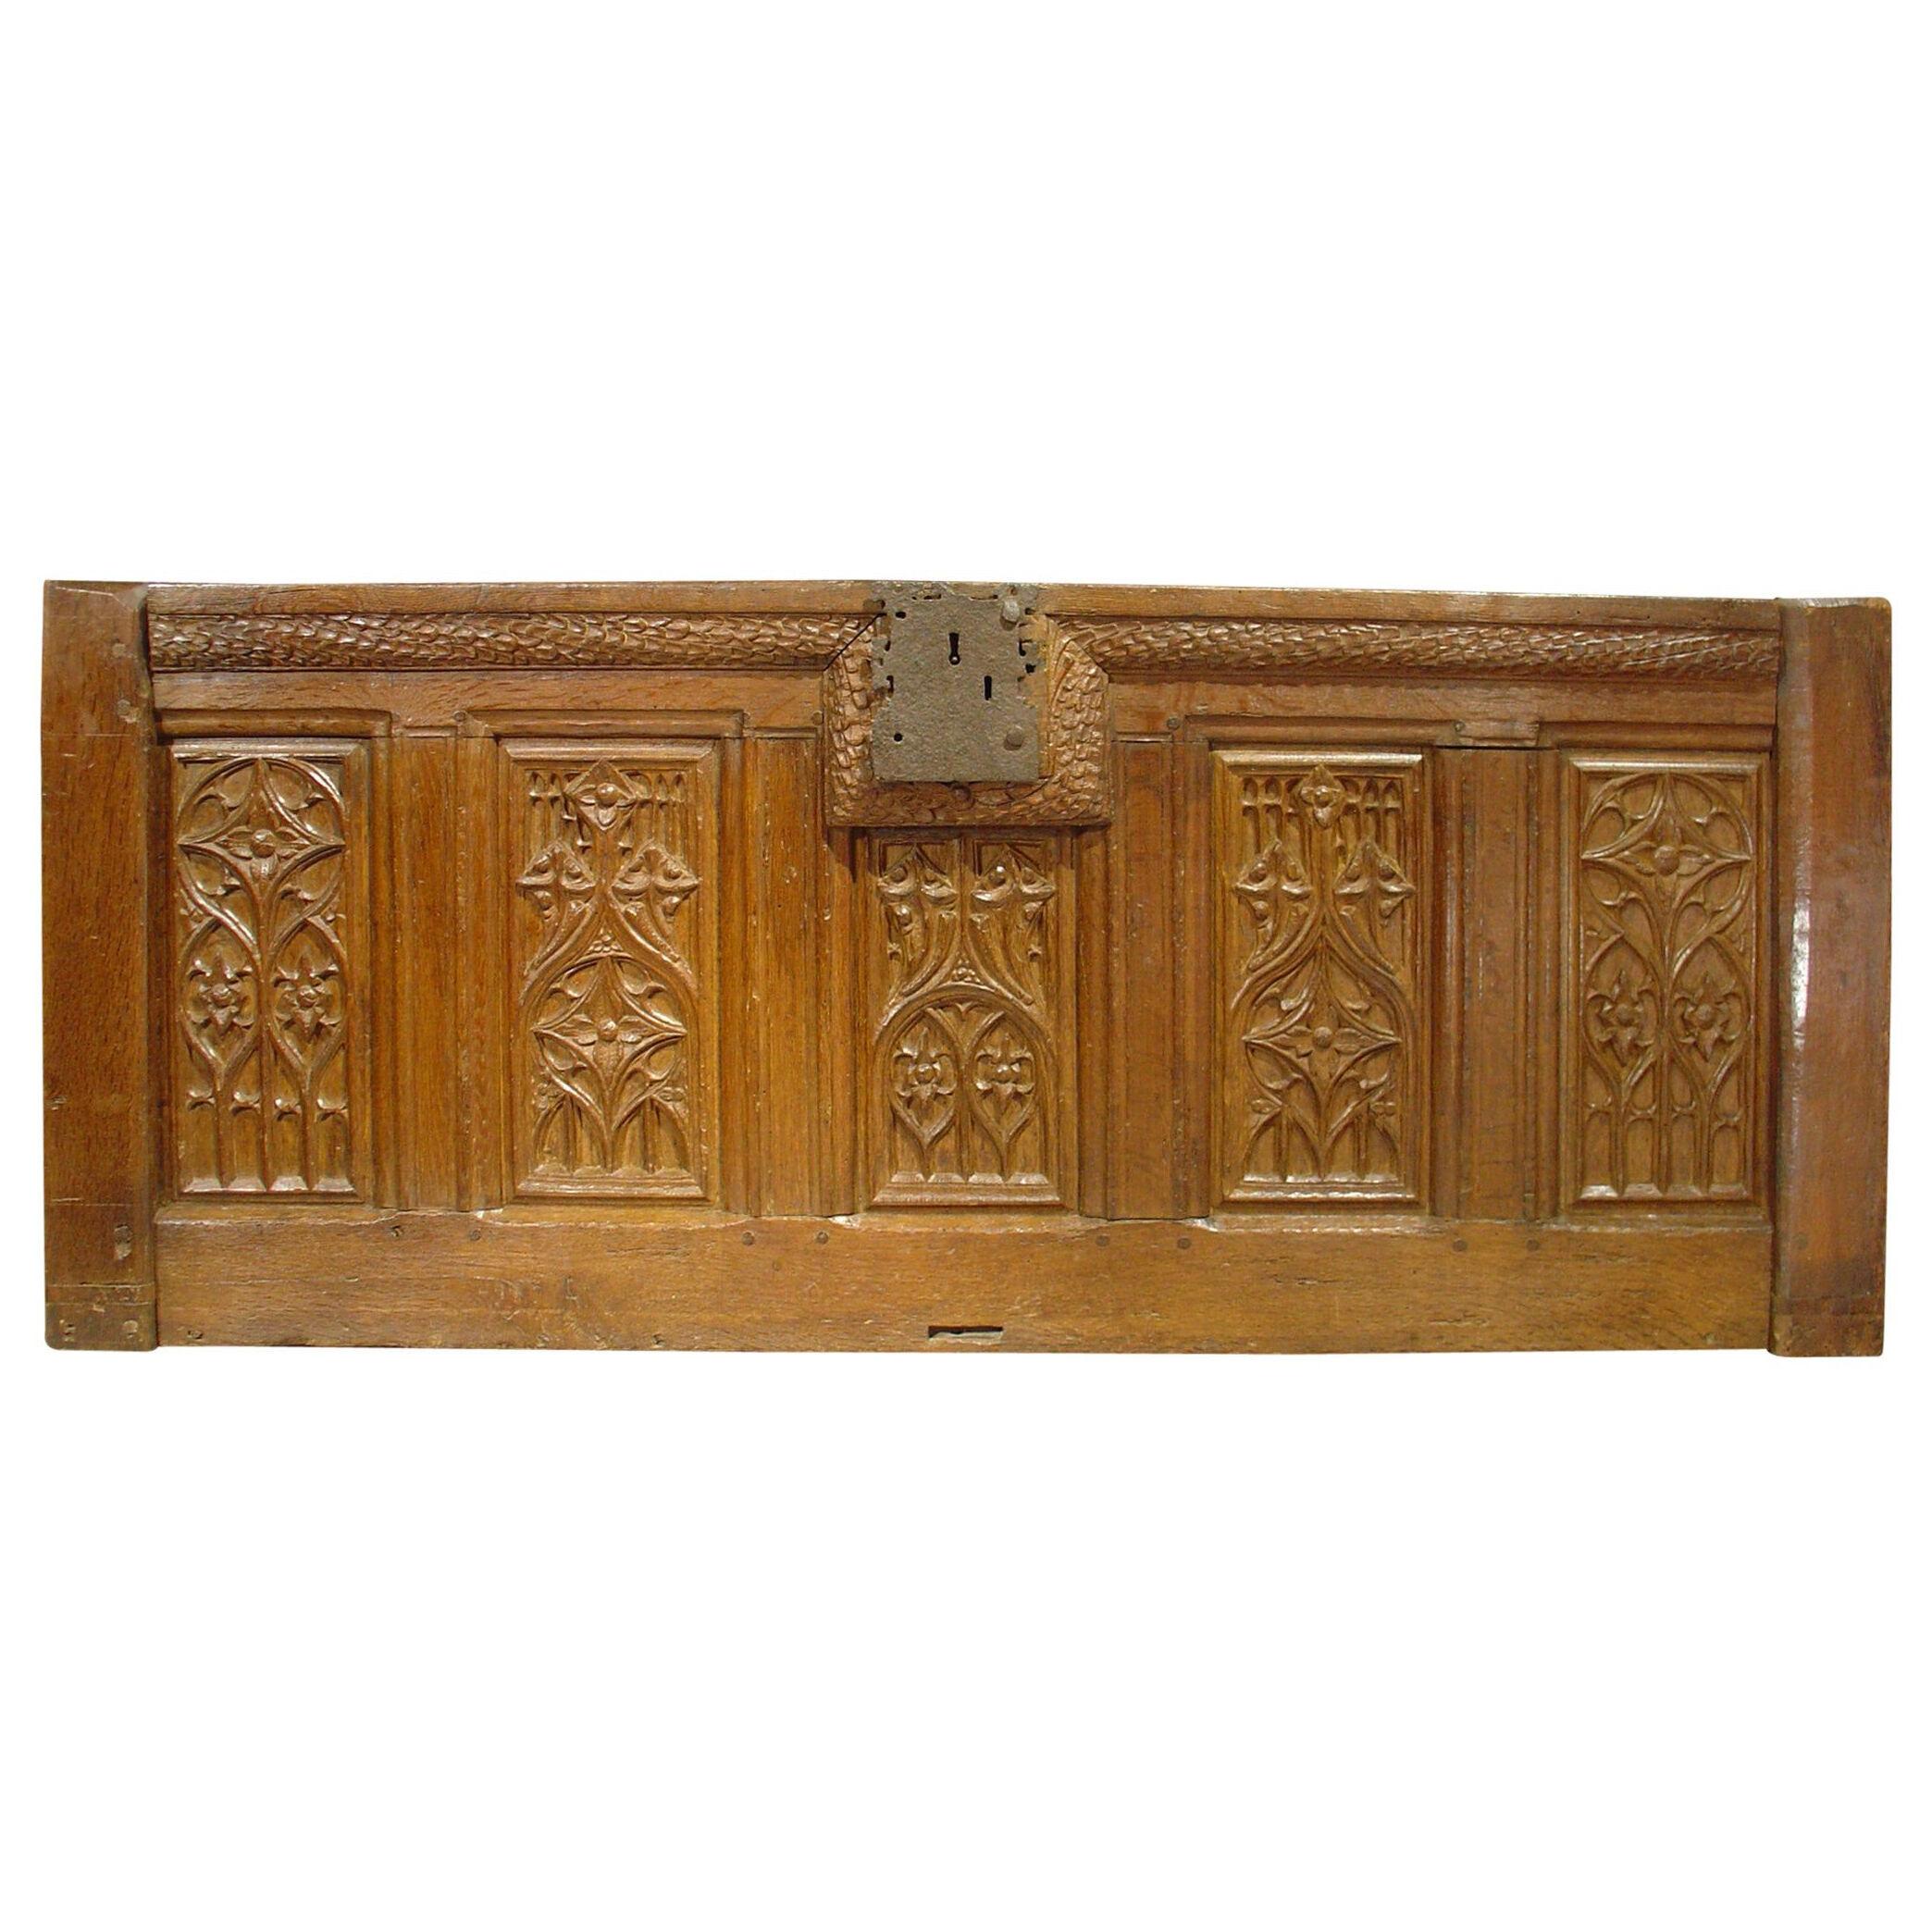 Period Gothic Trunk Frontage from Picardie France, Oak, circa 1500